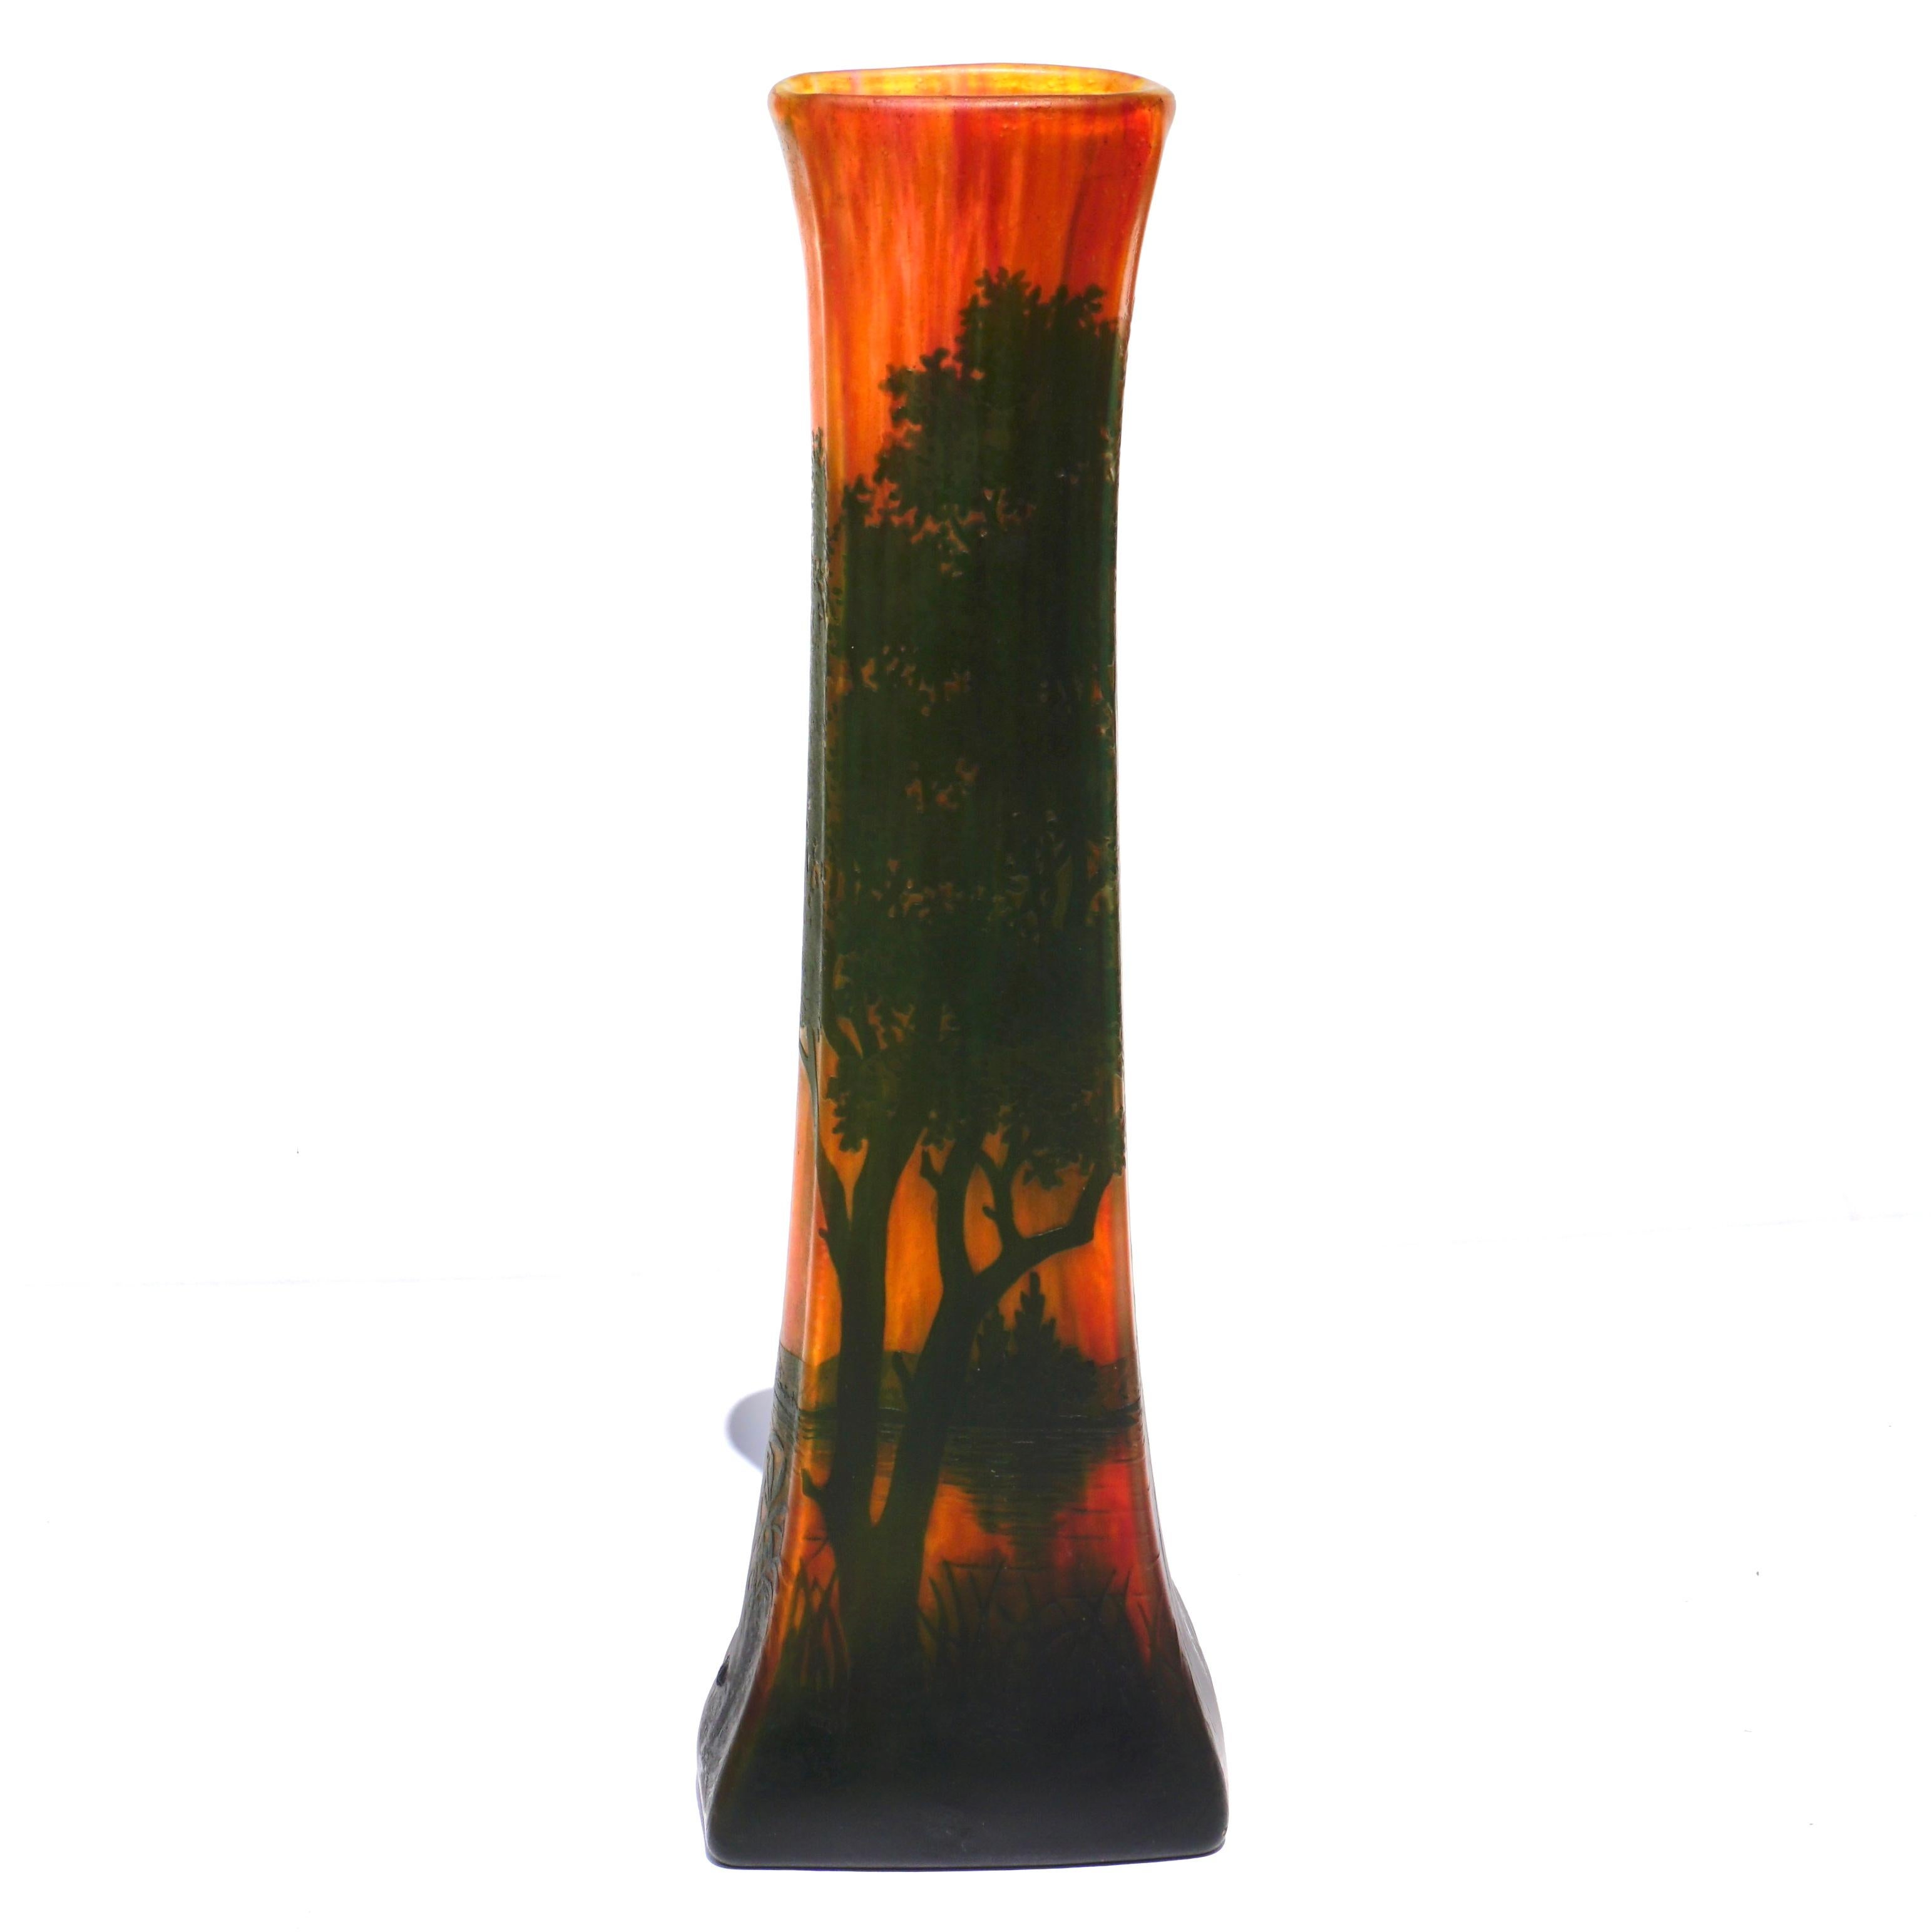 A warm scenic tall vase by Daum Freres from Nancy France circa 1900. The scene is a landscape with lake and green trees and bushes in the fore and back ground. The interesting feature of this four sided tapered vase in the yellow, orange and red